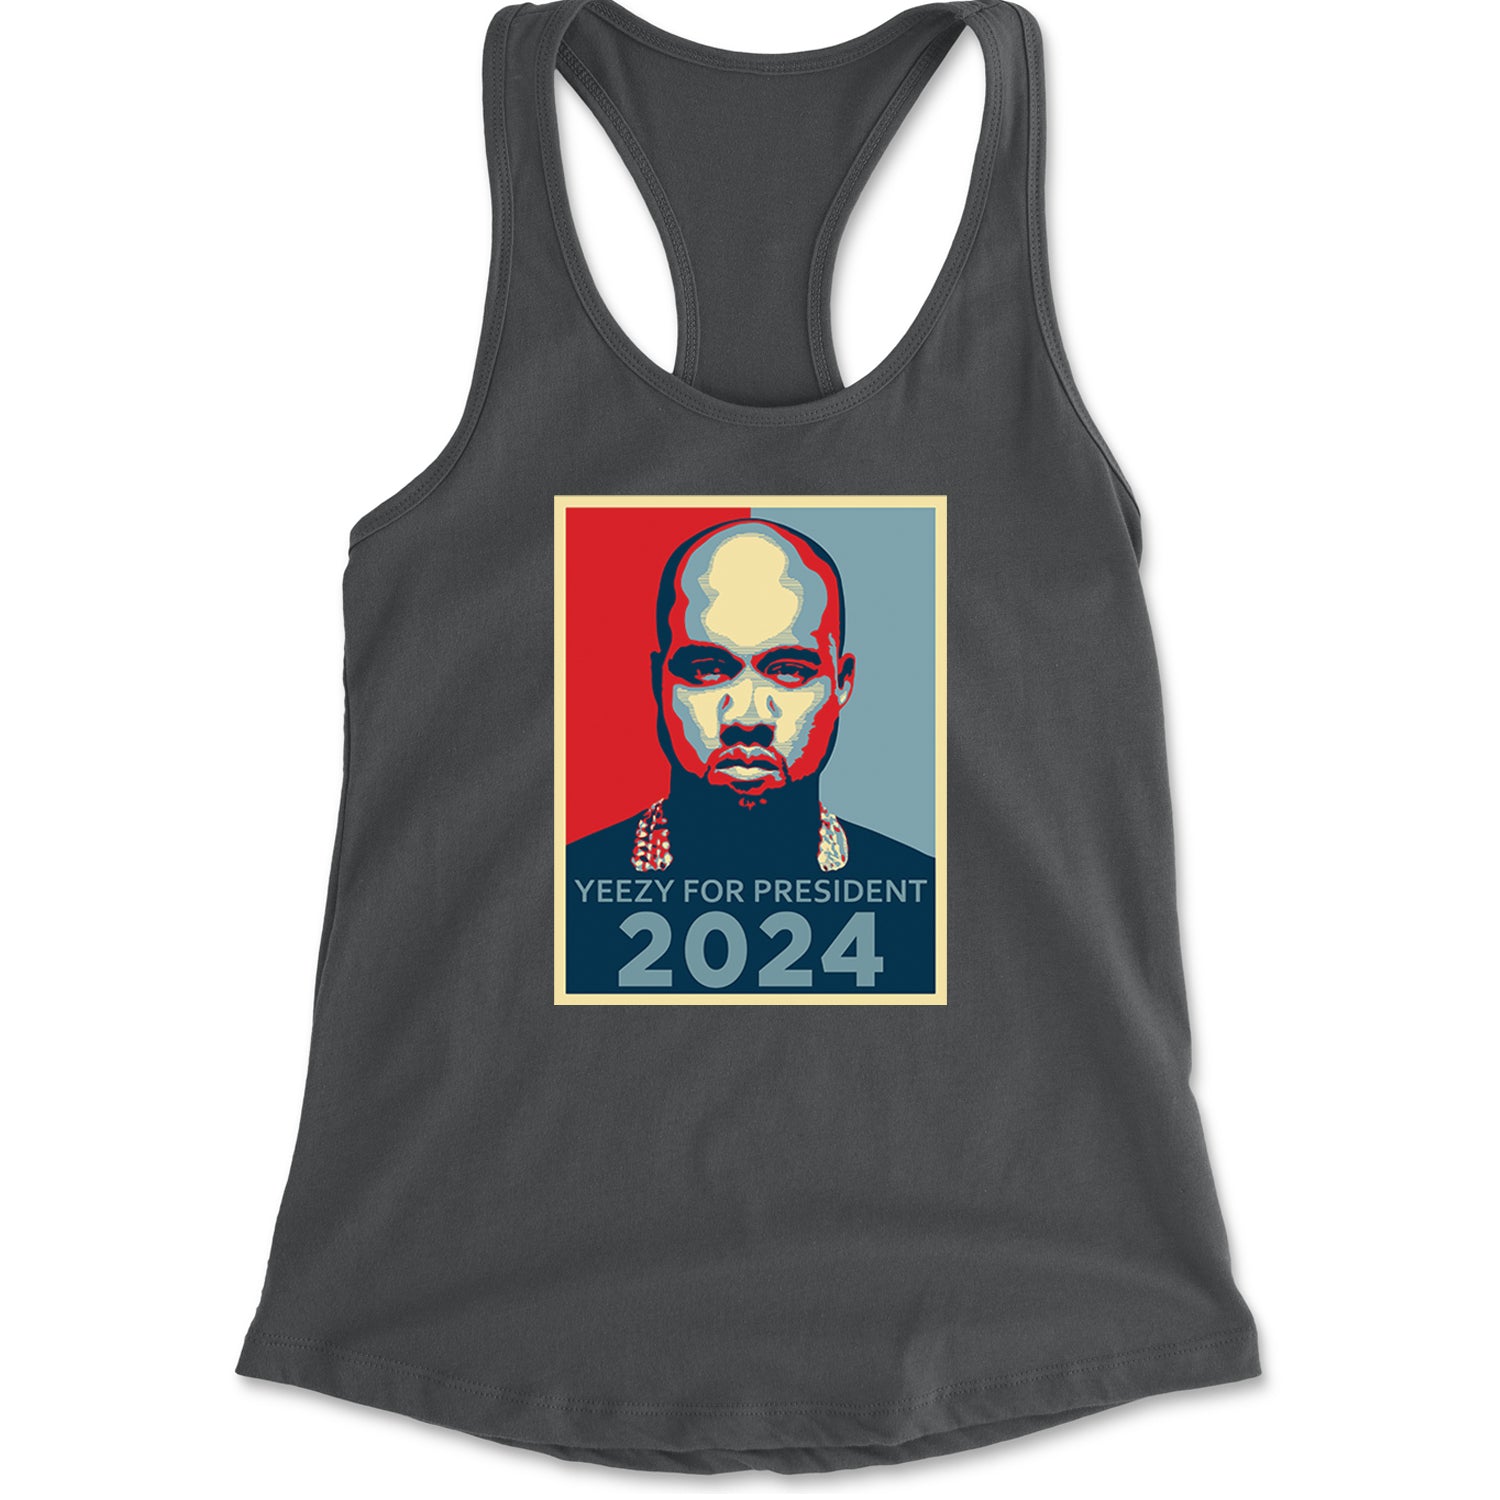 Yeezus For President Vote for Ye Racerback Tank Top for Women Charcoal Grey